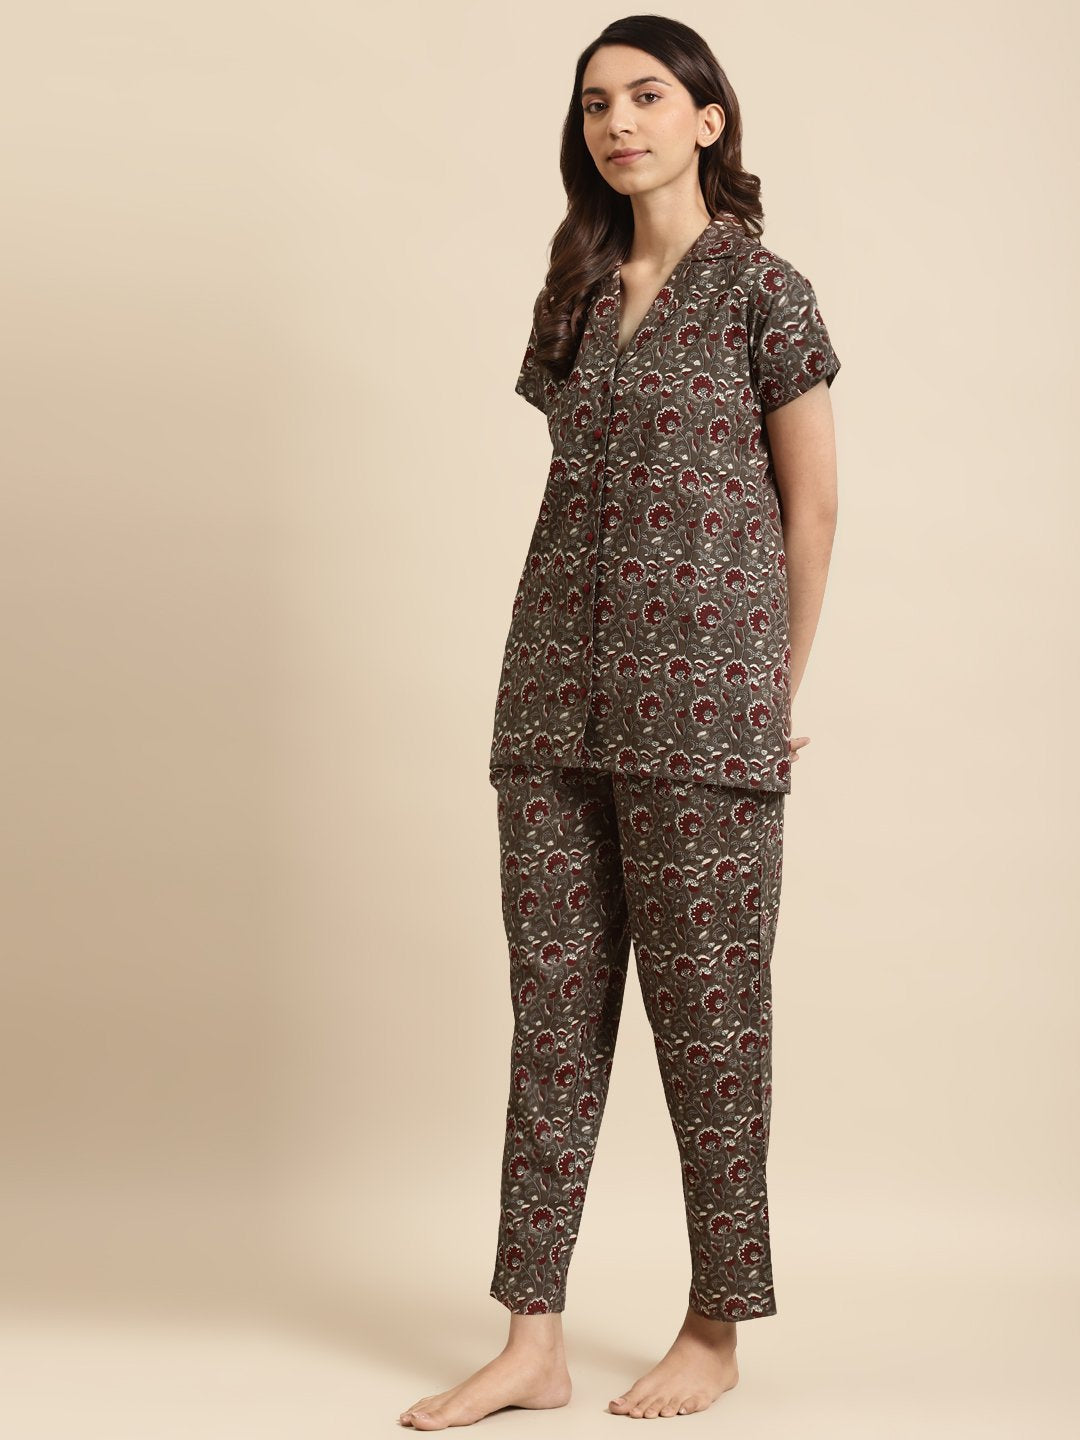 Women's Taupe & Maroon Printed Night Suit - Nayo Clothing